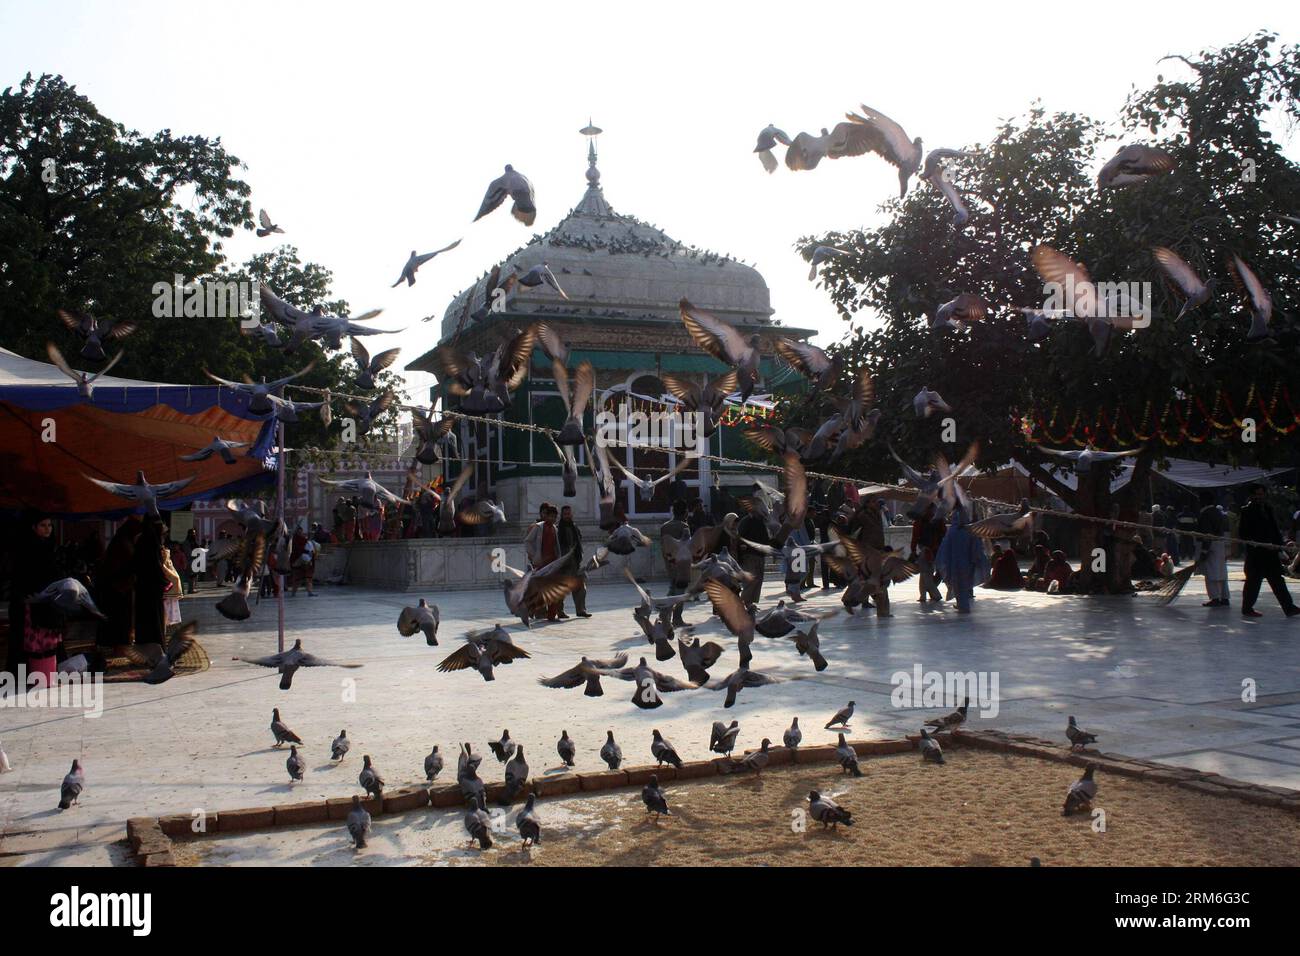 (140111) -- LAHORE, Jan. 11, 2014 (Xinhua) -- Pigeons fly up at the shrine of the Sufi saint Mian Mir Sahib during the last day of a three-day festival marking his 369th death anniversary in eastern Pakistan s Lahore on Jan. 11, 2014. (Xinhua/Jamil Ahmed) (djj) PAKISTAN-LAHORE-RELIGION-SHRINE PUBLICATIONxNOTxINxCHN   Lahore Jan 11 2014 XINHUA pigeons Fly up AT The Shrine of The Sufi Saint Mian me Sahib during The Load Day of a Three Day Festival marking His  Death Anniversary in Eastern Pakistan S Lahore ON Jan 11 2014 XINHUA Jamil Ahmed  Pakistan Lahore Religion Shrine PUBLICATIONxNOTxINxCHN Stock Photo